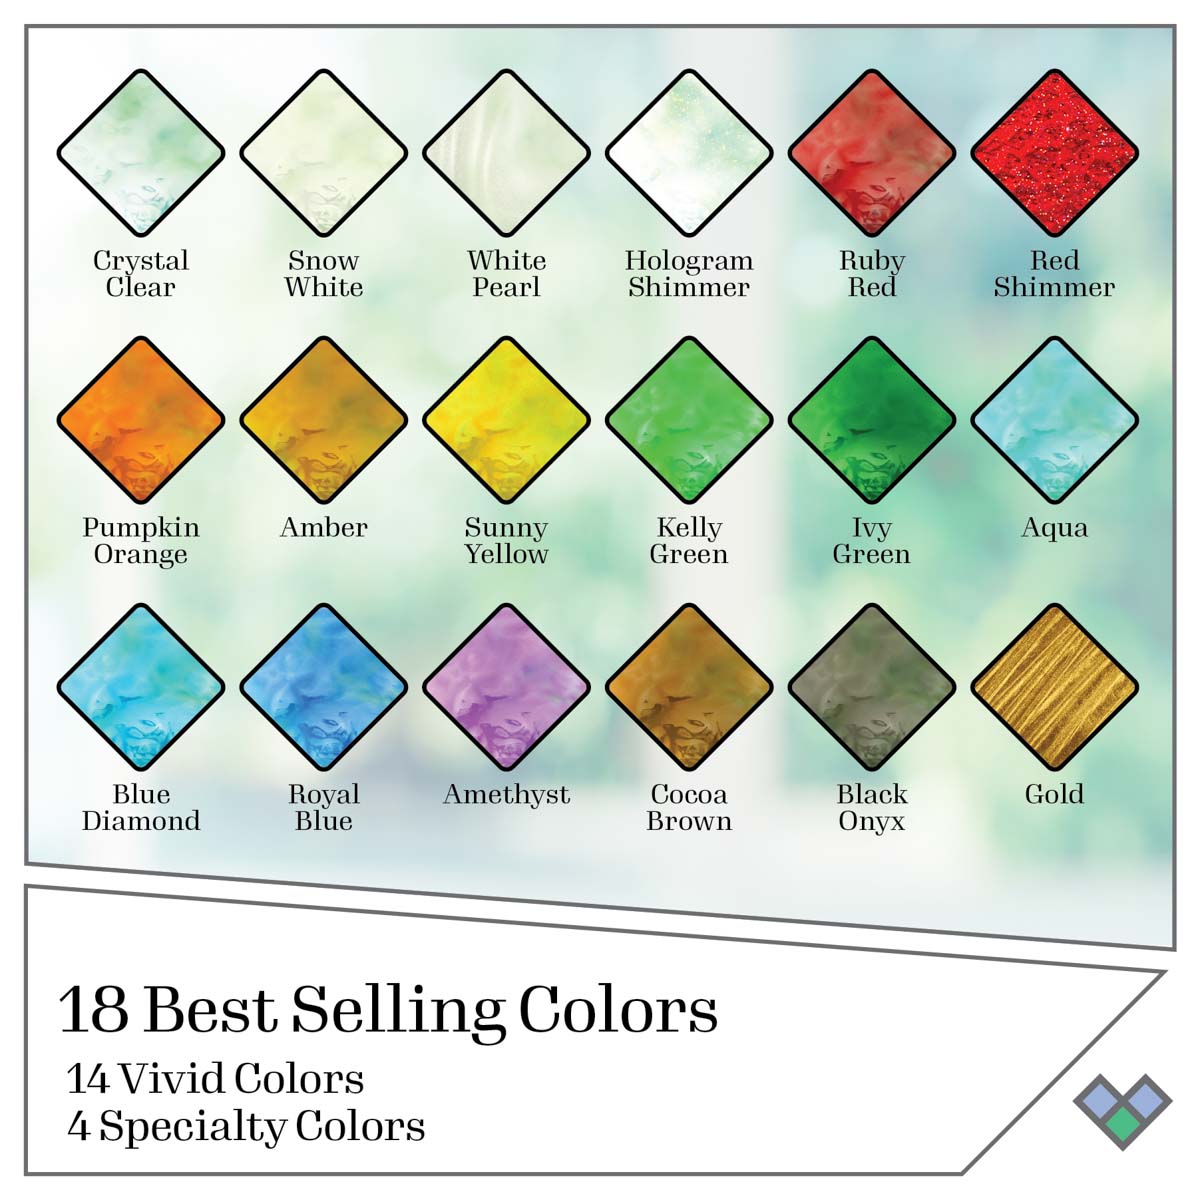 PLAID GALLERY GLASS PAINT/LEADING PICK YOUR COLOR – NEW – Mocitos